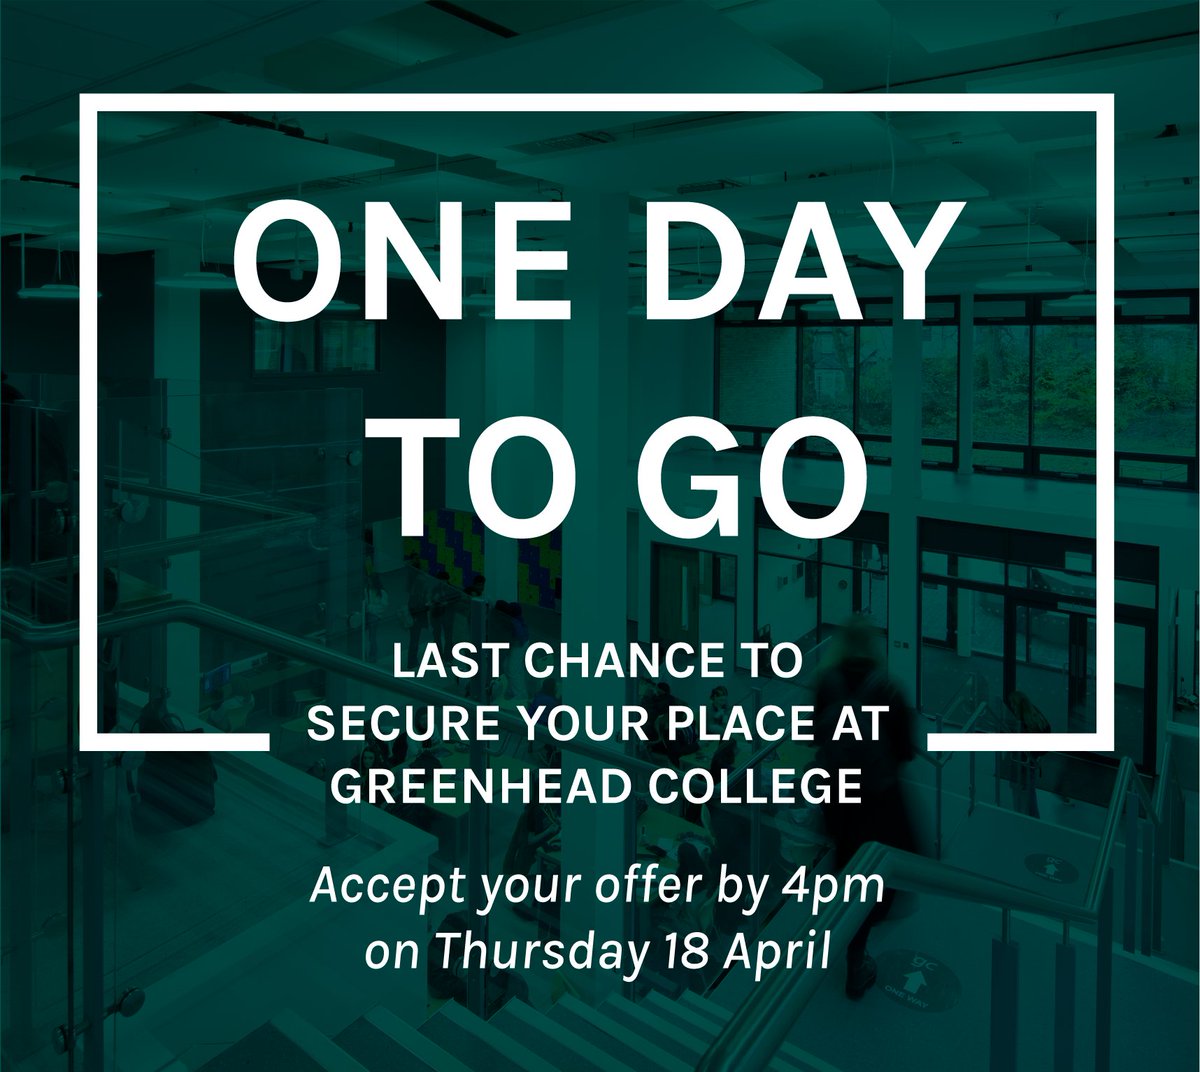 Have you received an offer to study at Greenhead College? Don't forget you have just over 24 hours to accept your place before the deadline of 4pm tomorrow (Thursday 18 April). ✅ Accepting is easy! Simply fill out the form sent out in your offer email. #Classof2026